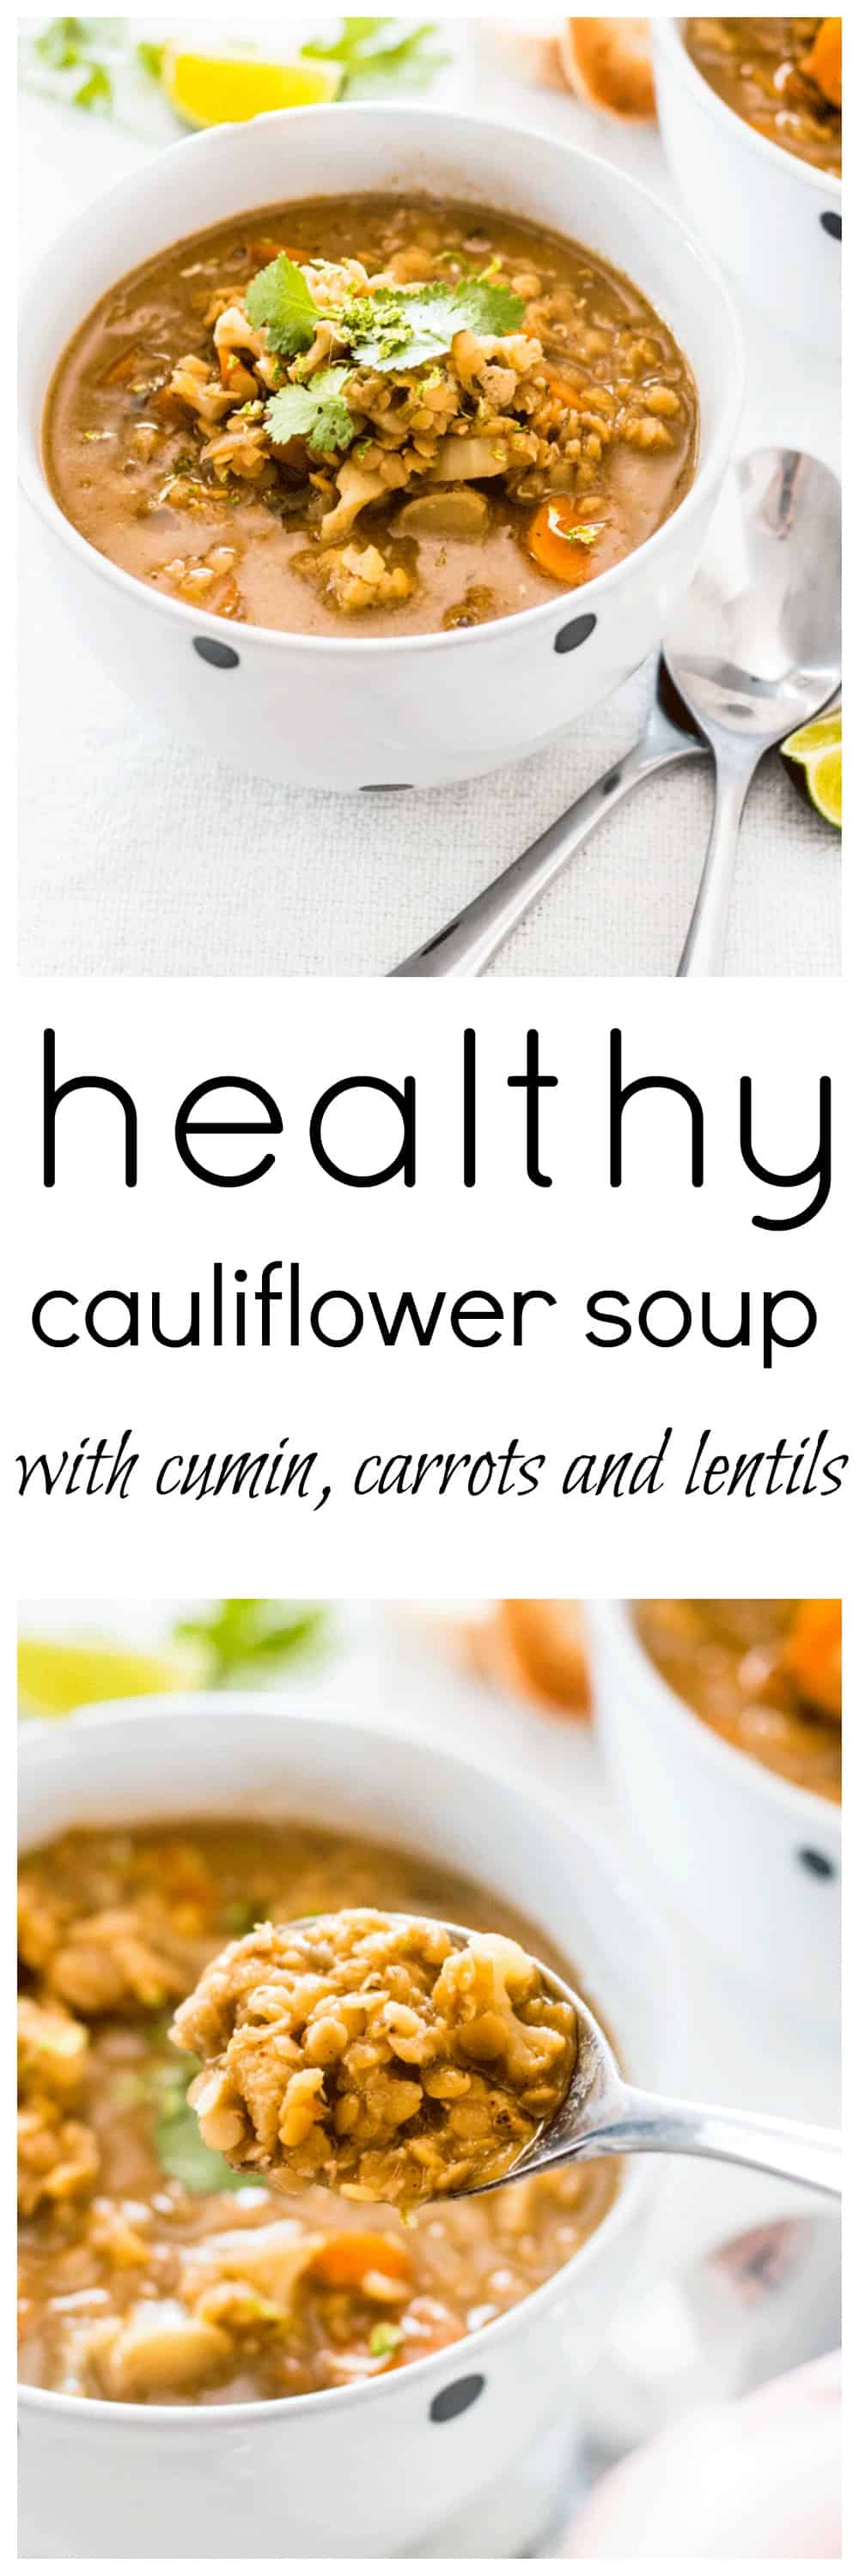 Healthy Cauliflower Soup with Carrot, Cumin and Lentils